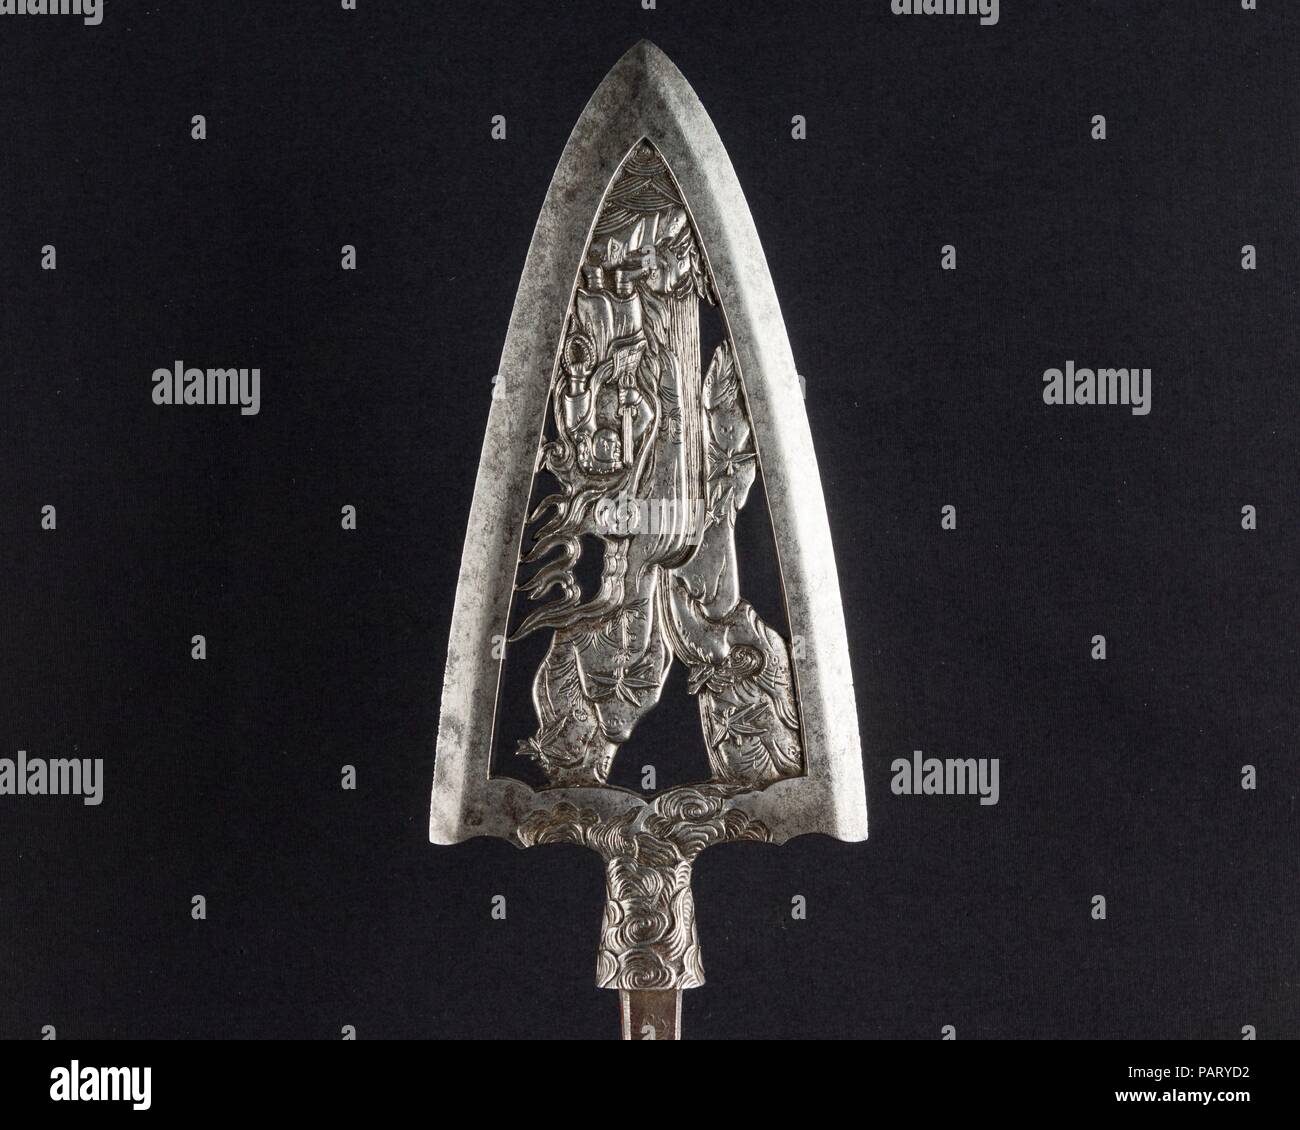 Ceremonial Arrowhead (Yanone). Culture: Japanese. Dimensions: L. 12 3/4 in. (32.4 cm); L. of head 6 in. (15.7 cm); W. 2 3/4 in. (7 cm); Wt. 7.1 oz. (201.3 g). Steel-chiseler: Umetada Motoshige (Japanese, Edo period, died 1675). Date: dated August 1645.  Large arrowheads, pierced and elaborately chiseled with landscapes, birds, flowers, dragons, and Buddhist divinities, were created to be admired for the beauty of their metalwork and design rather than for use in archery. This arrowhead is dated 1645 and signed by Umetada Motoshige (died 1675), a member of the Umetada school of swordsmiths, <i> Stock Photo